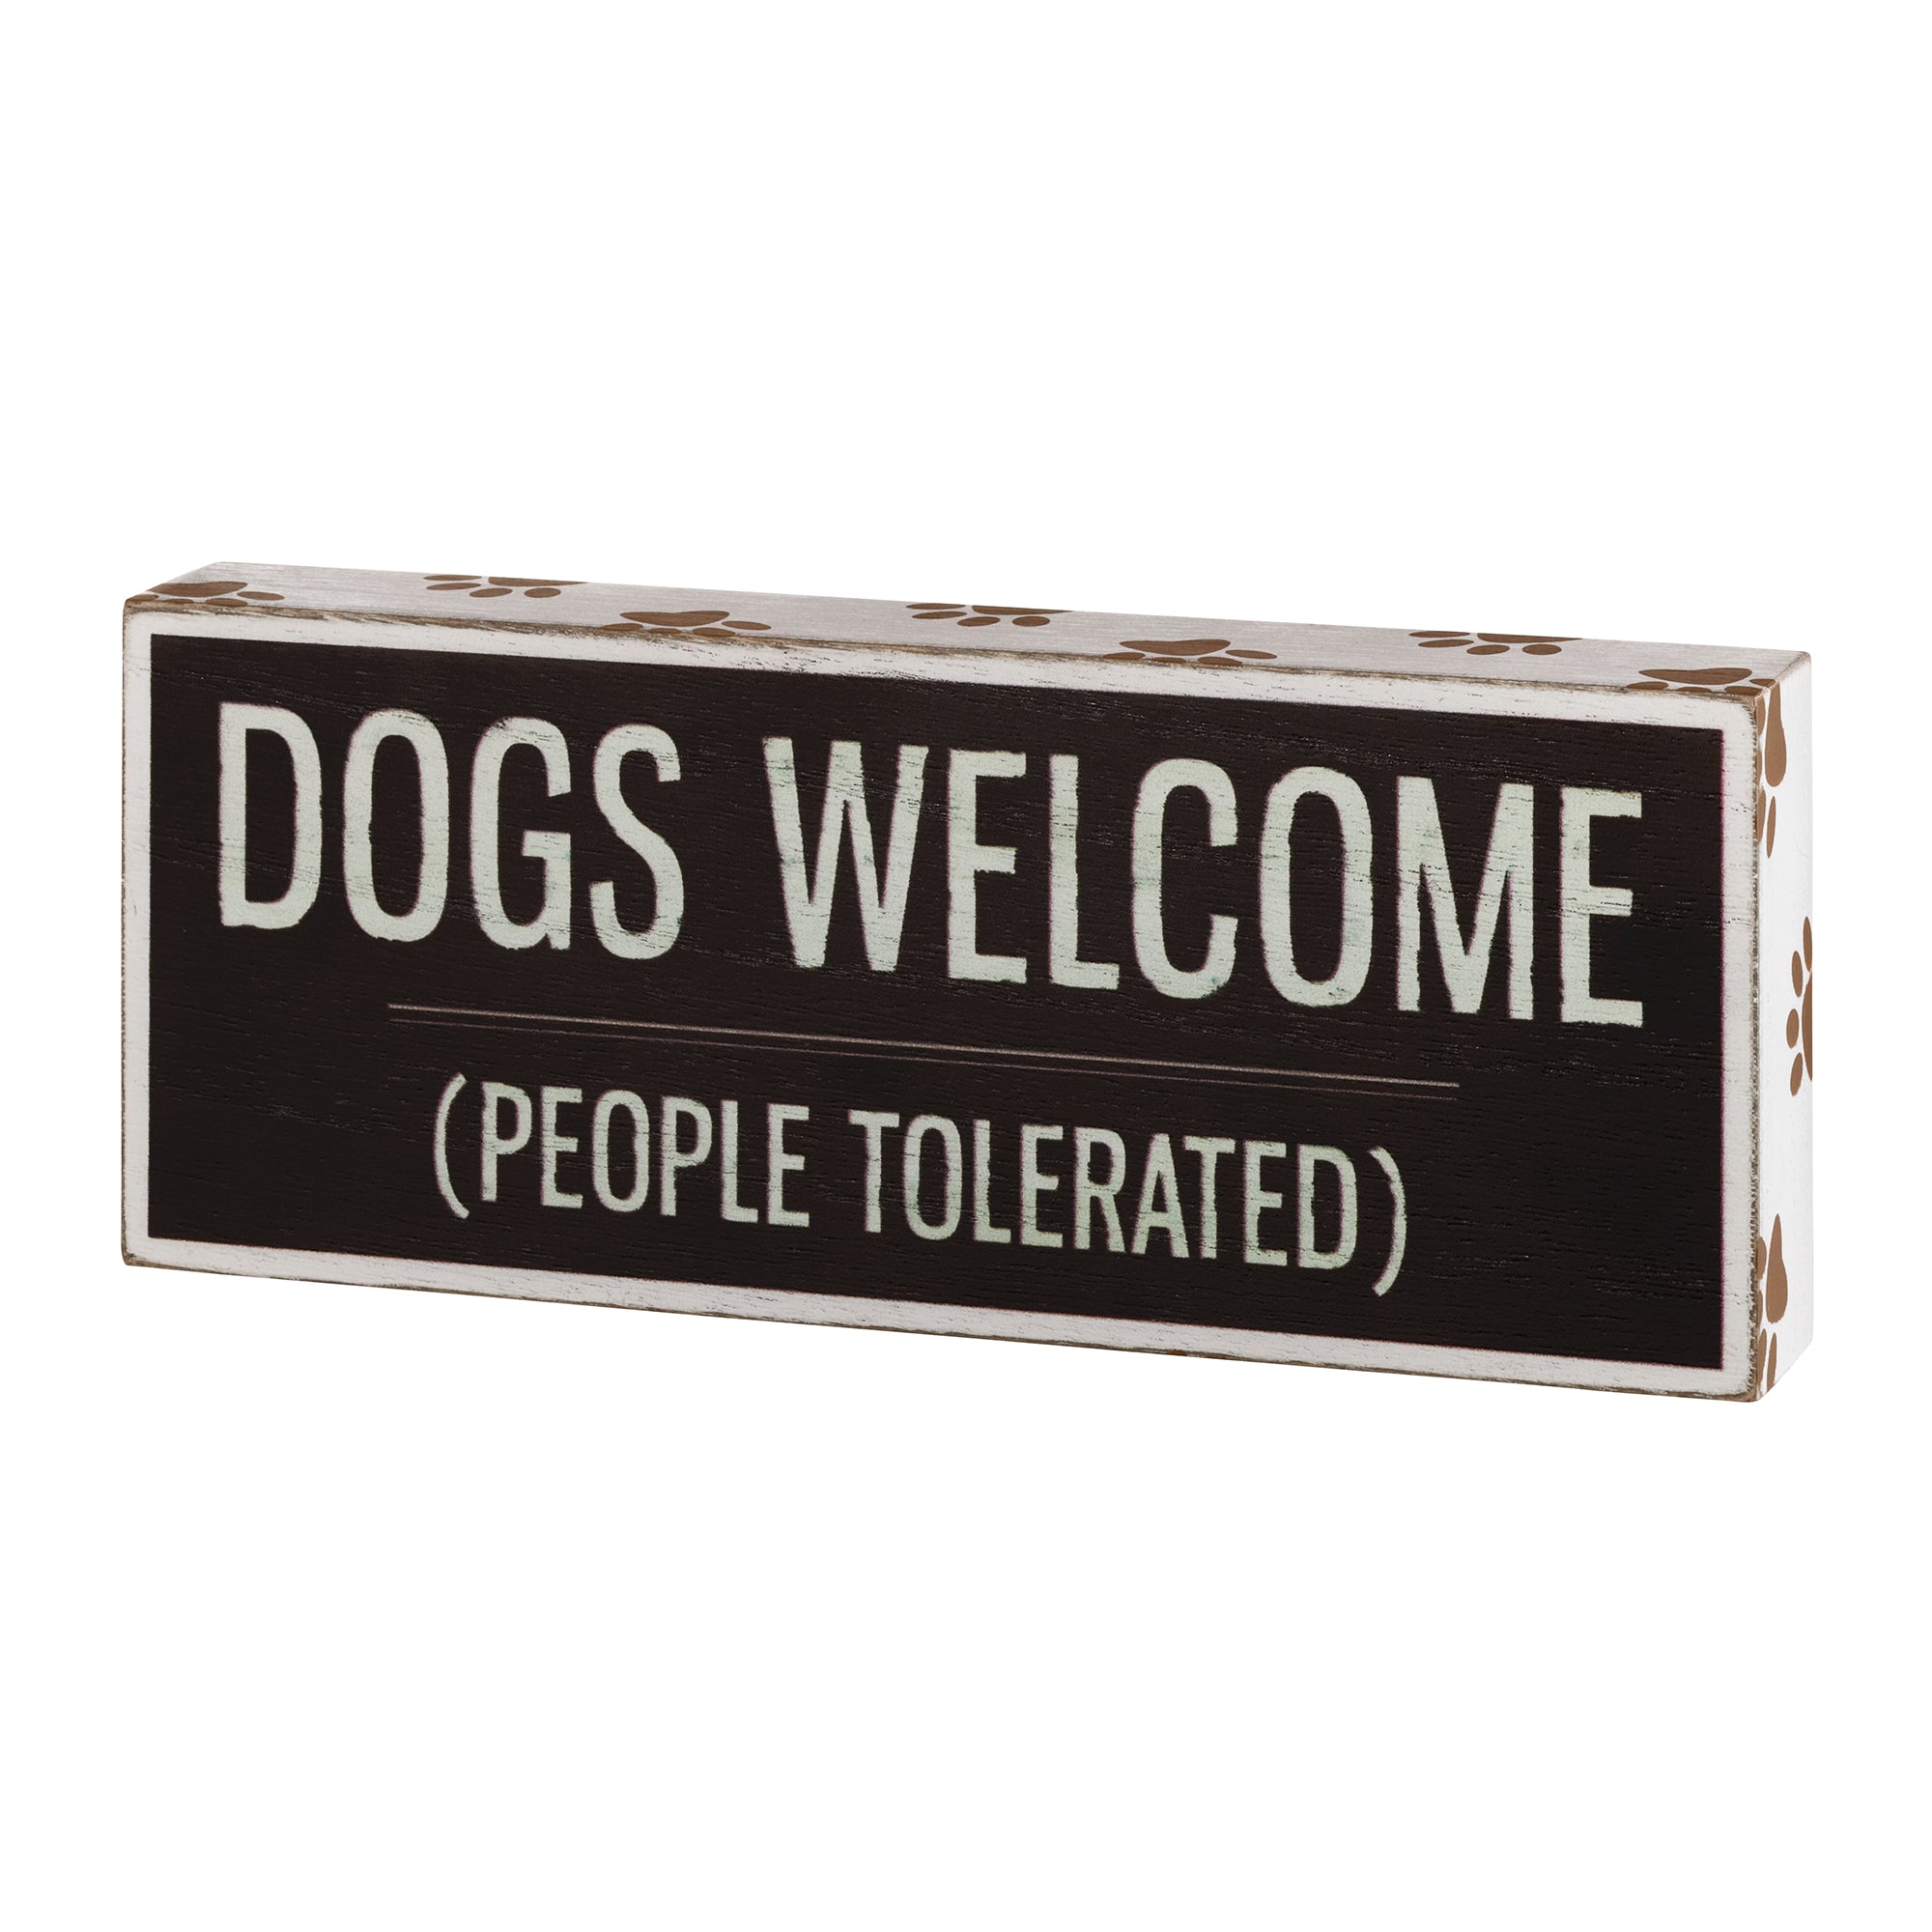 Dog Lover Gift Sign with Funny Saying